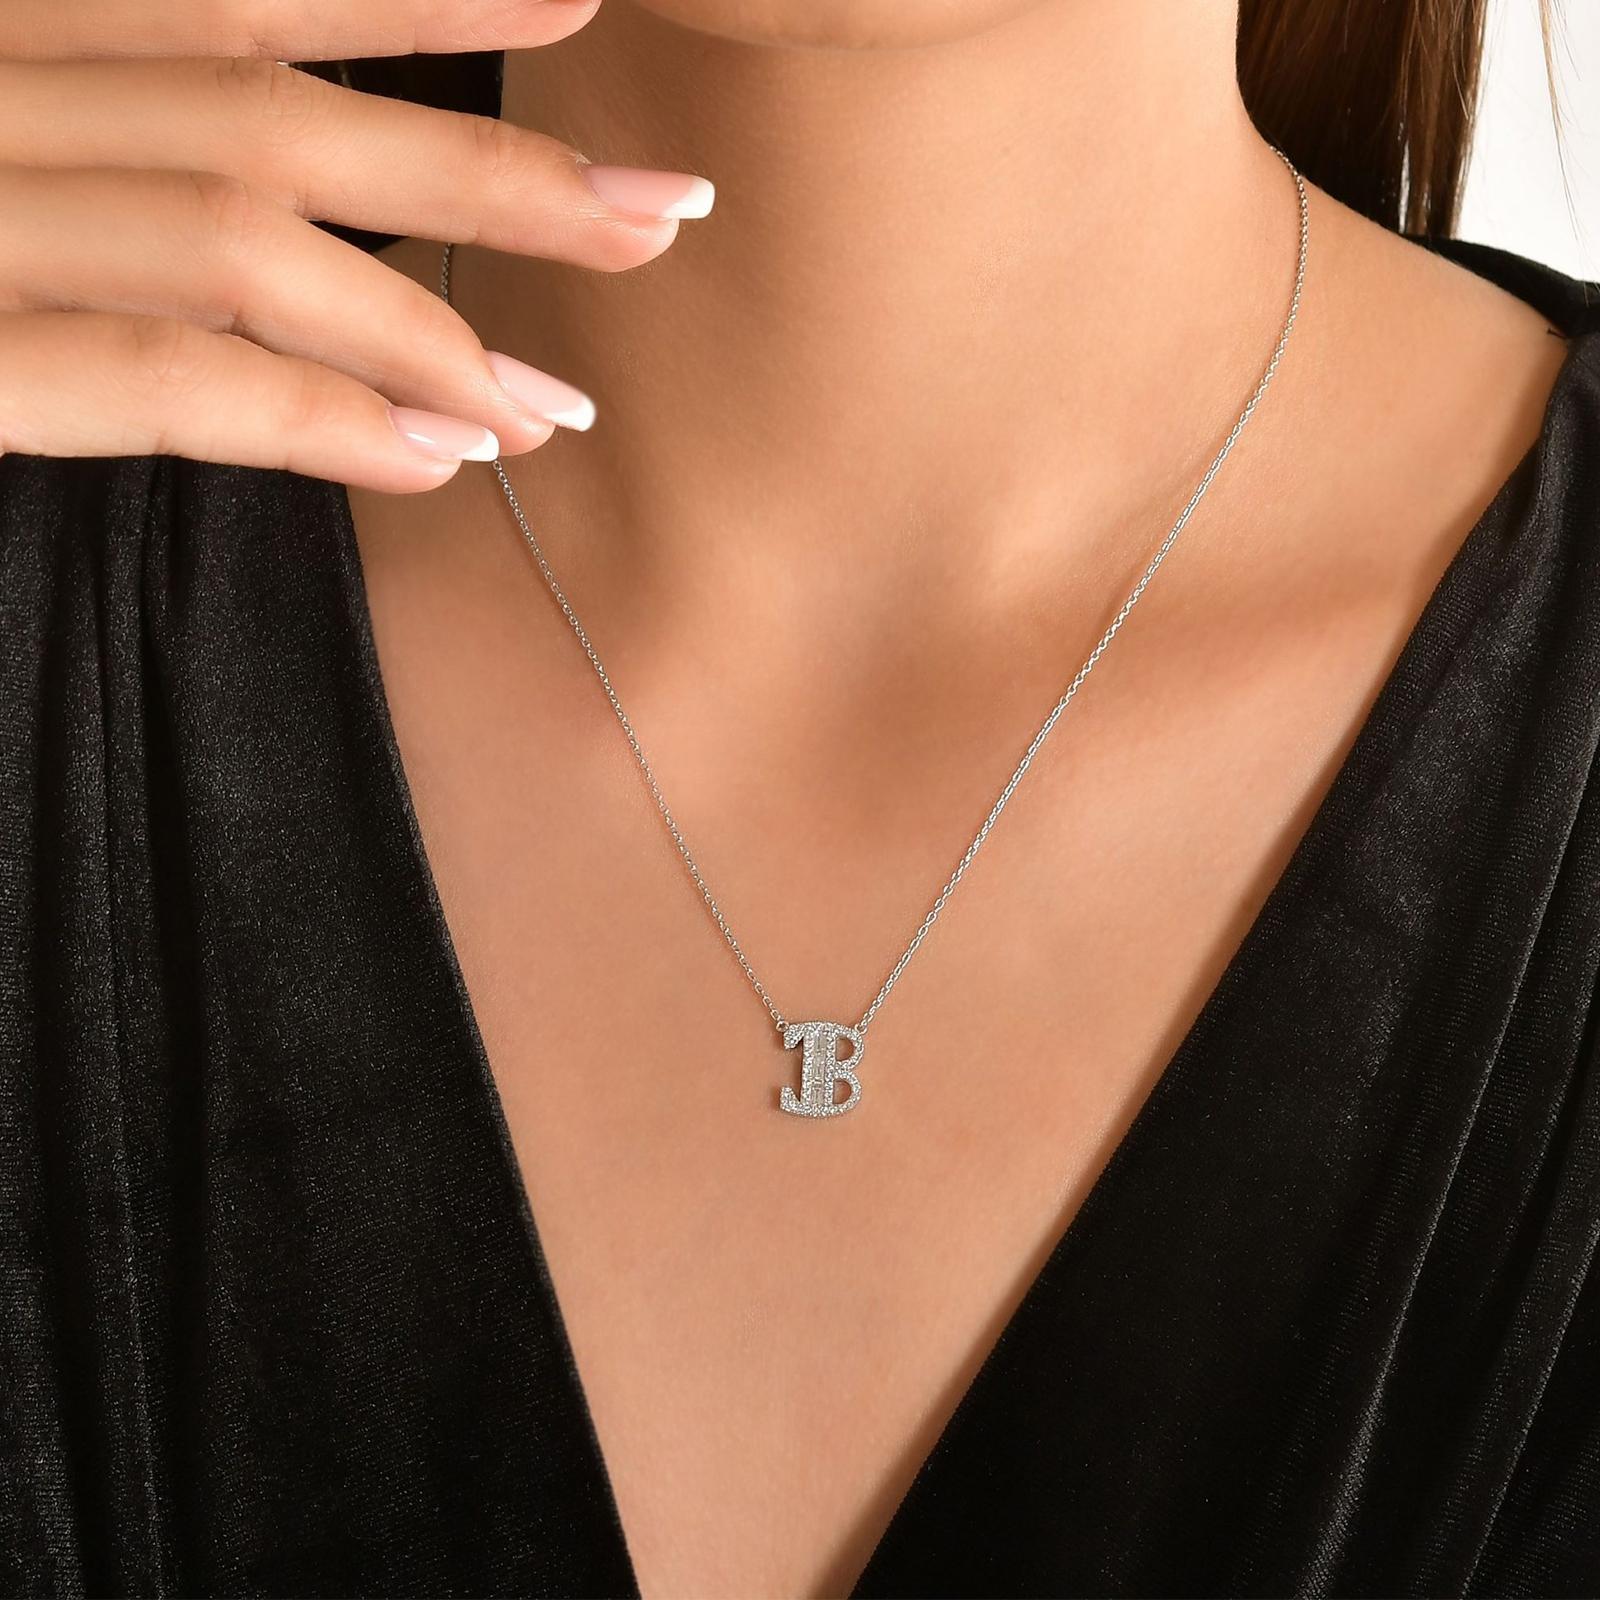 This Beautiful Baguette Diamond Letter Pendant Is Entirely Handcrafted In 14 Karat White Gold. 
The Letter B Pendant Is Garlanded With Channel-Set Baguette-Cut Diamonds And Prong Set Brilliant Round Diamonds Weighing .37 Carats. All Of The Stones